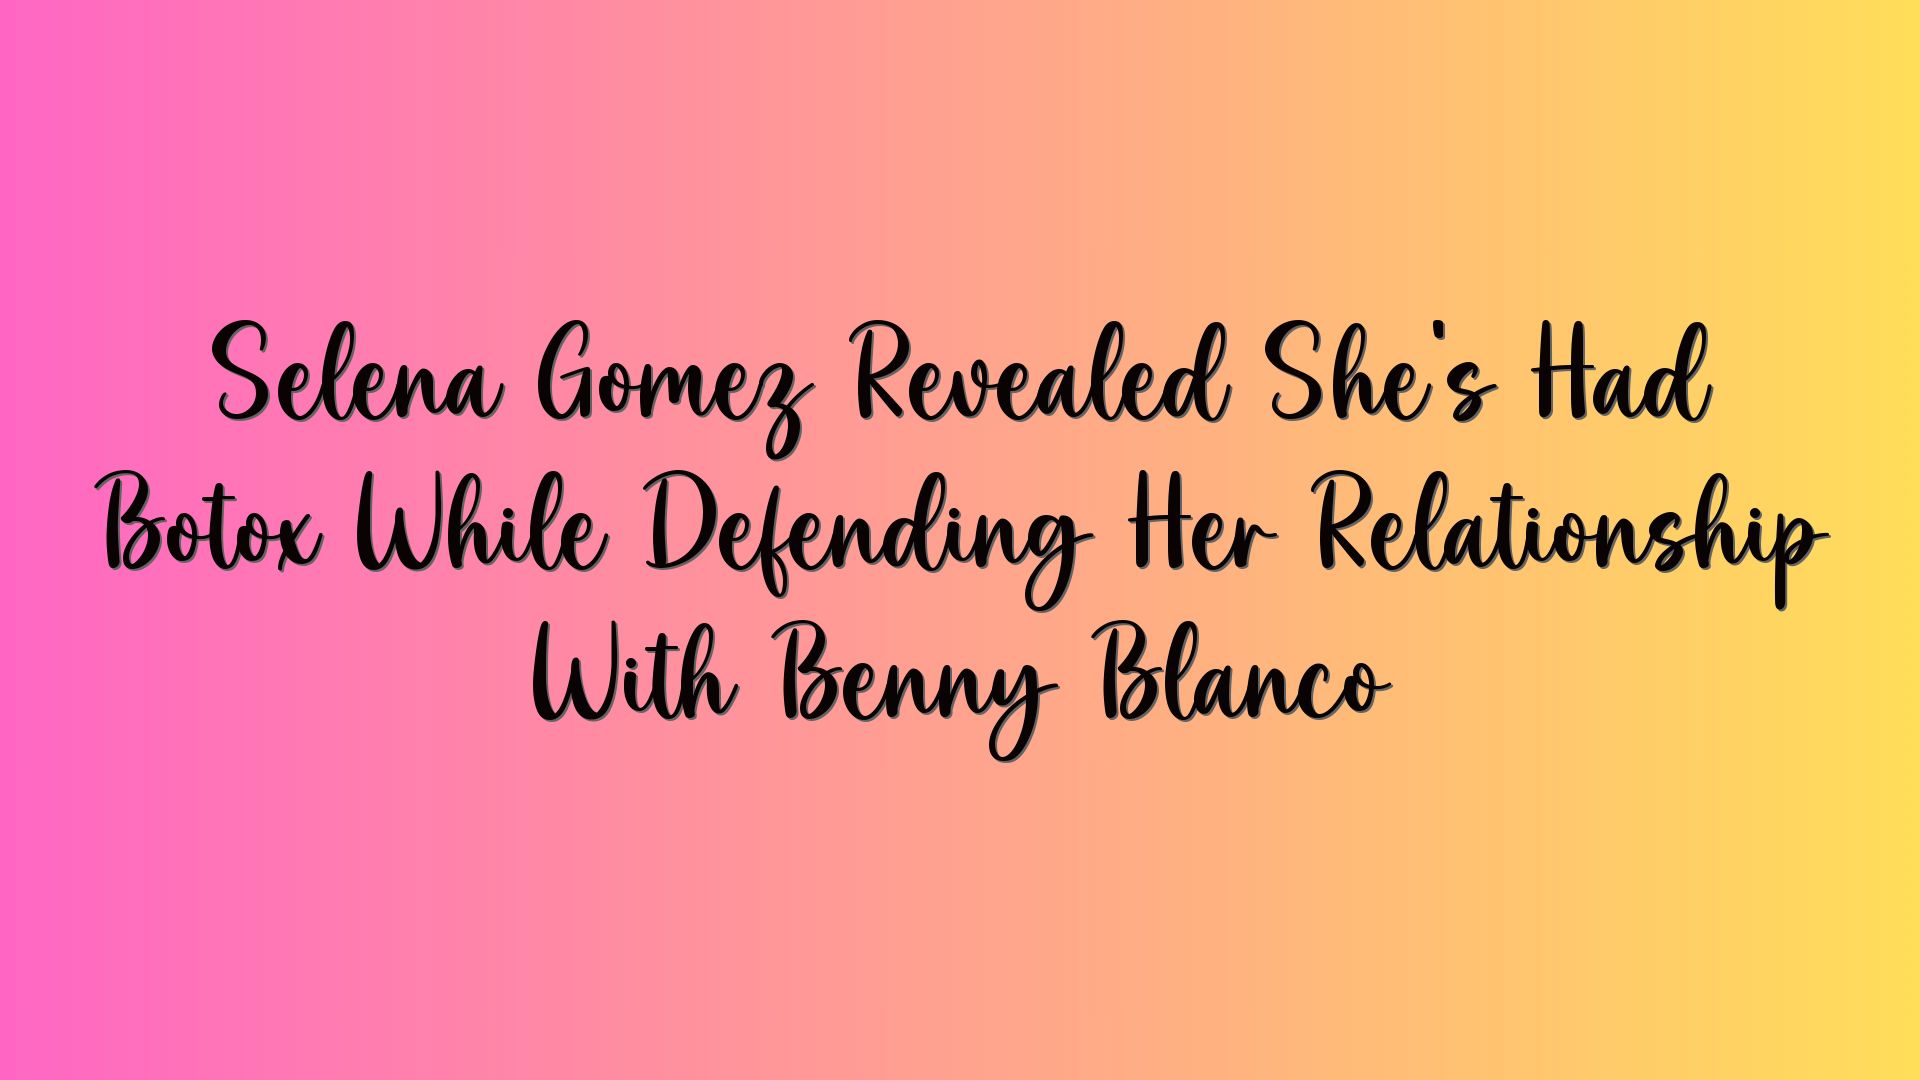 Selena Gomez Revealed She’s Had Botox While Defending Her Relationship With Benny Blanco